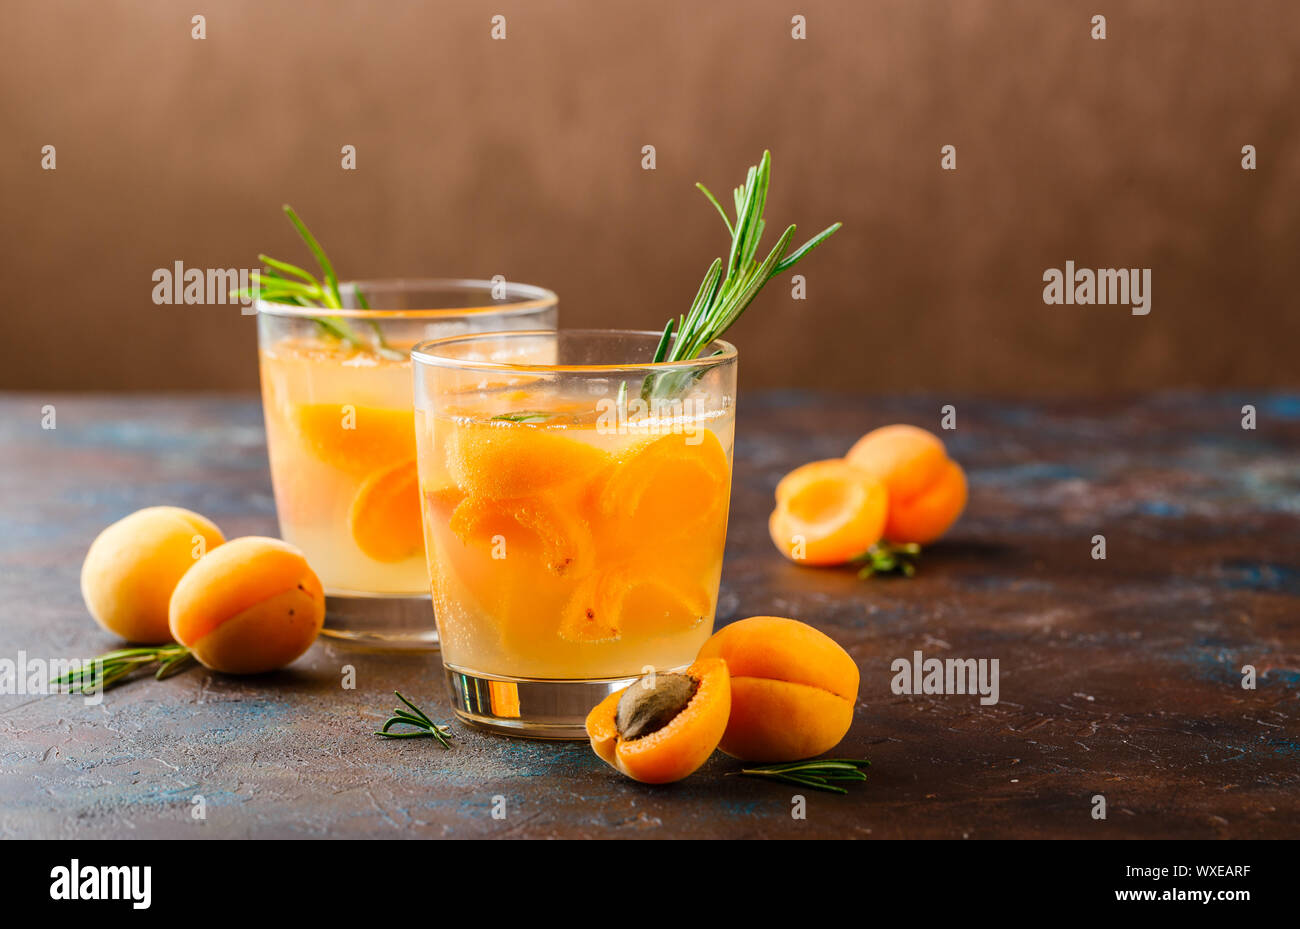 Summer drinks, rosemary aprcot cocktails. Stock Photo